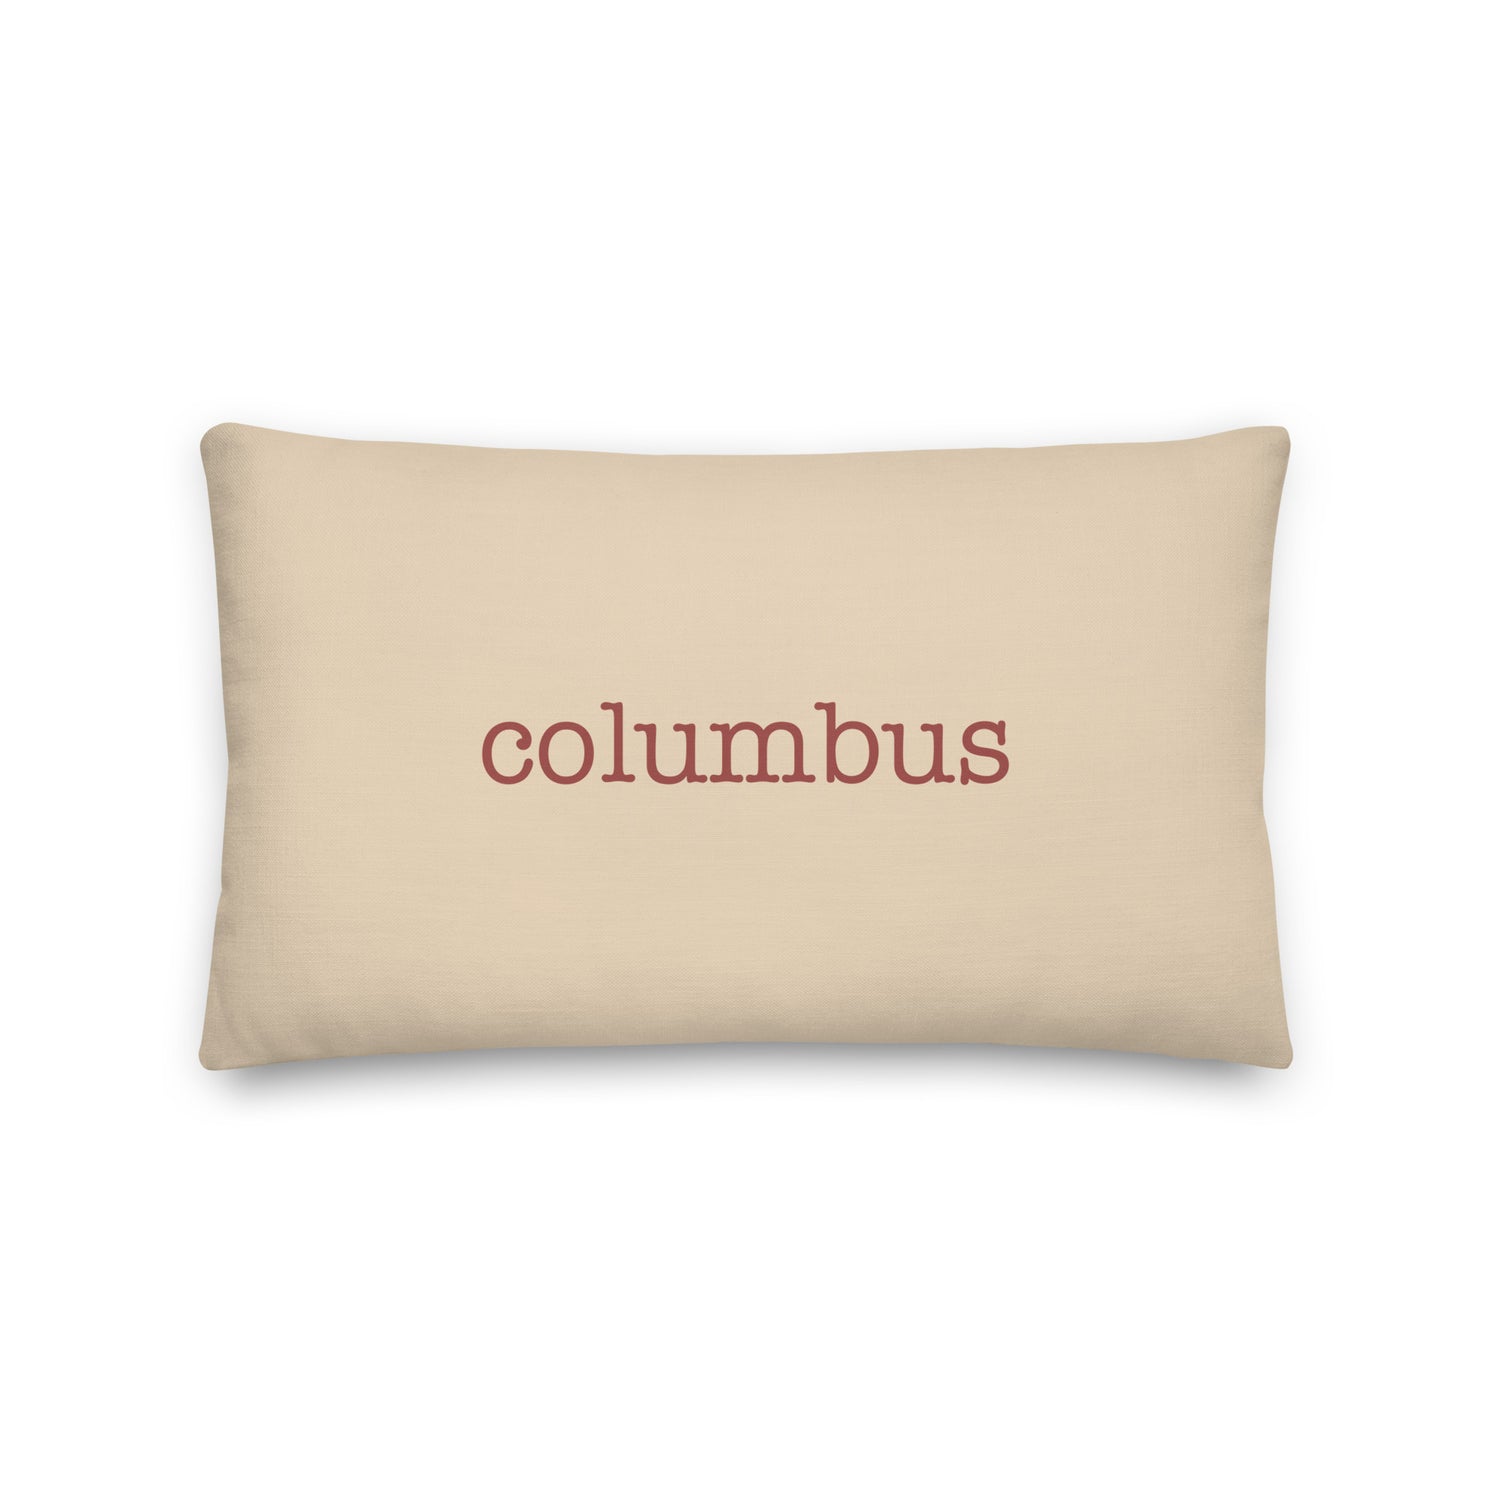 Columbus Ohio Pillows and Blankets • CMH Airport Code